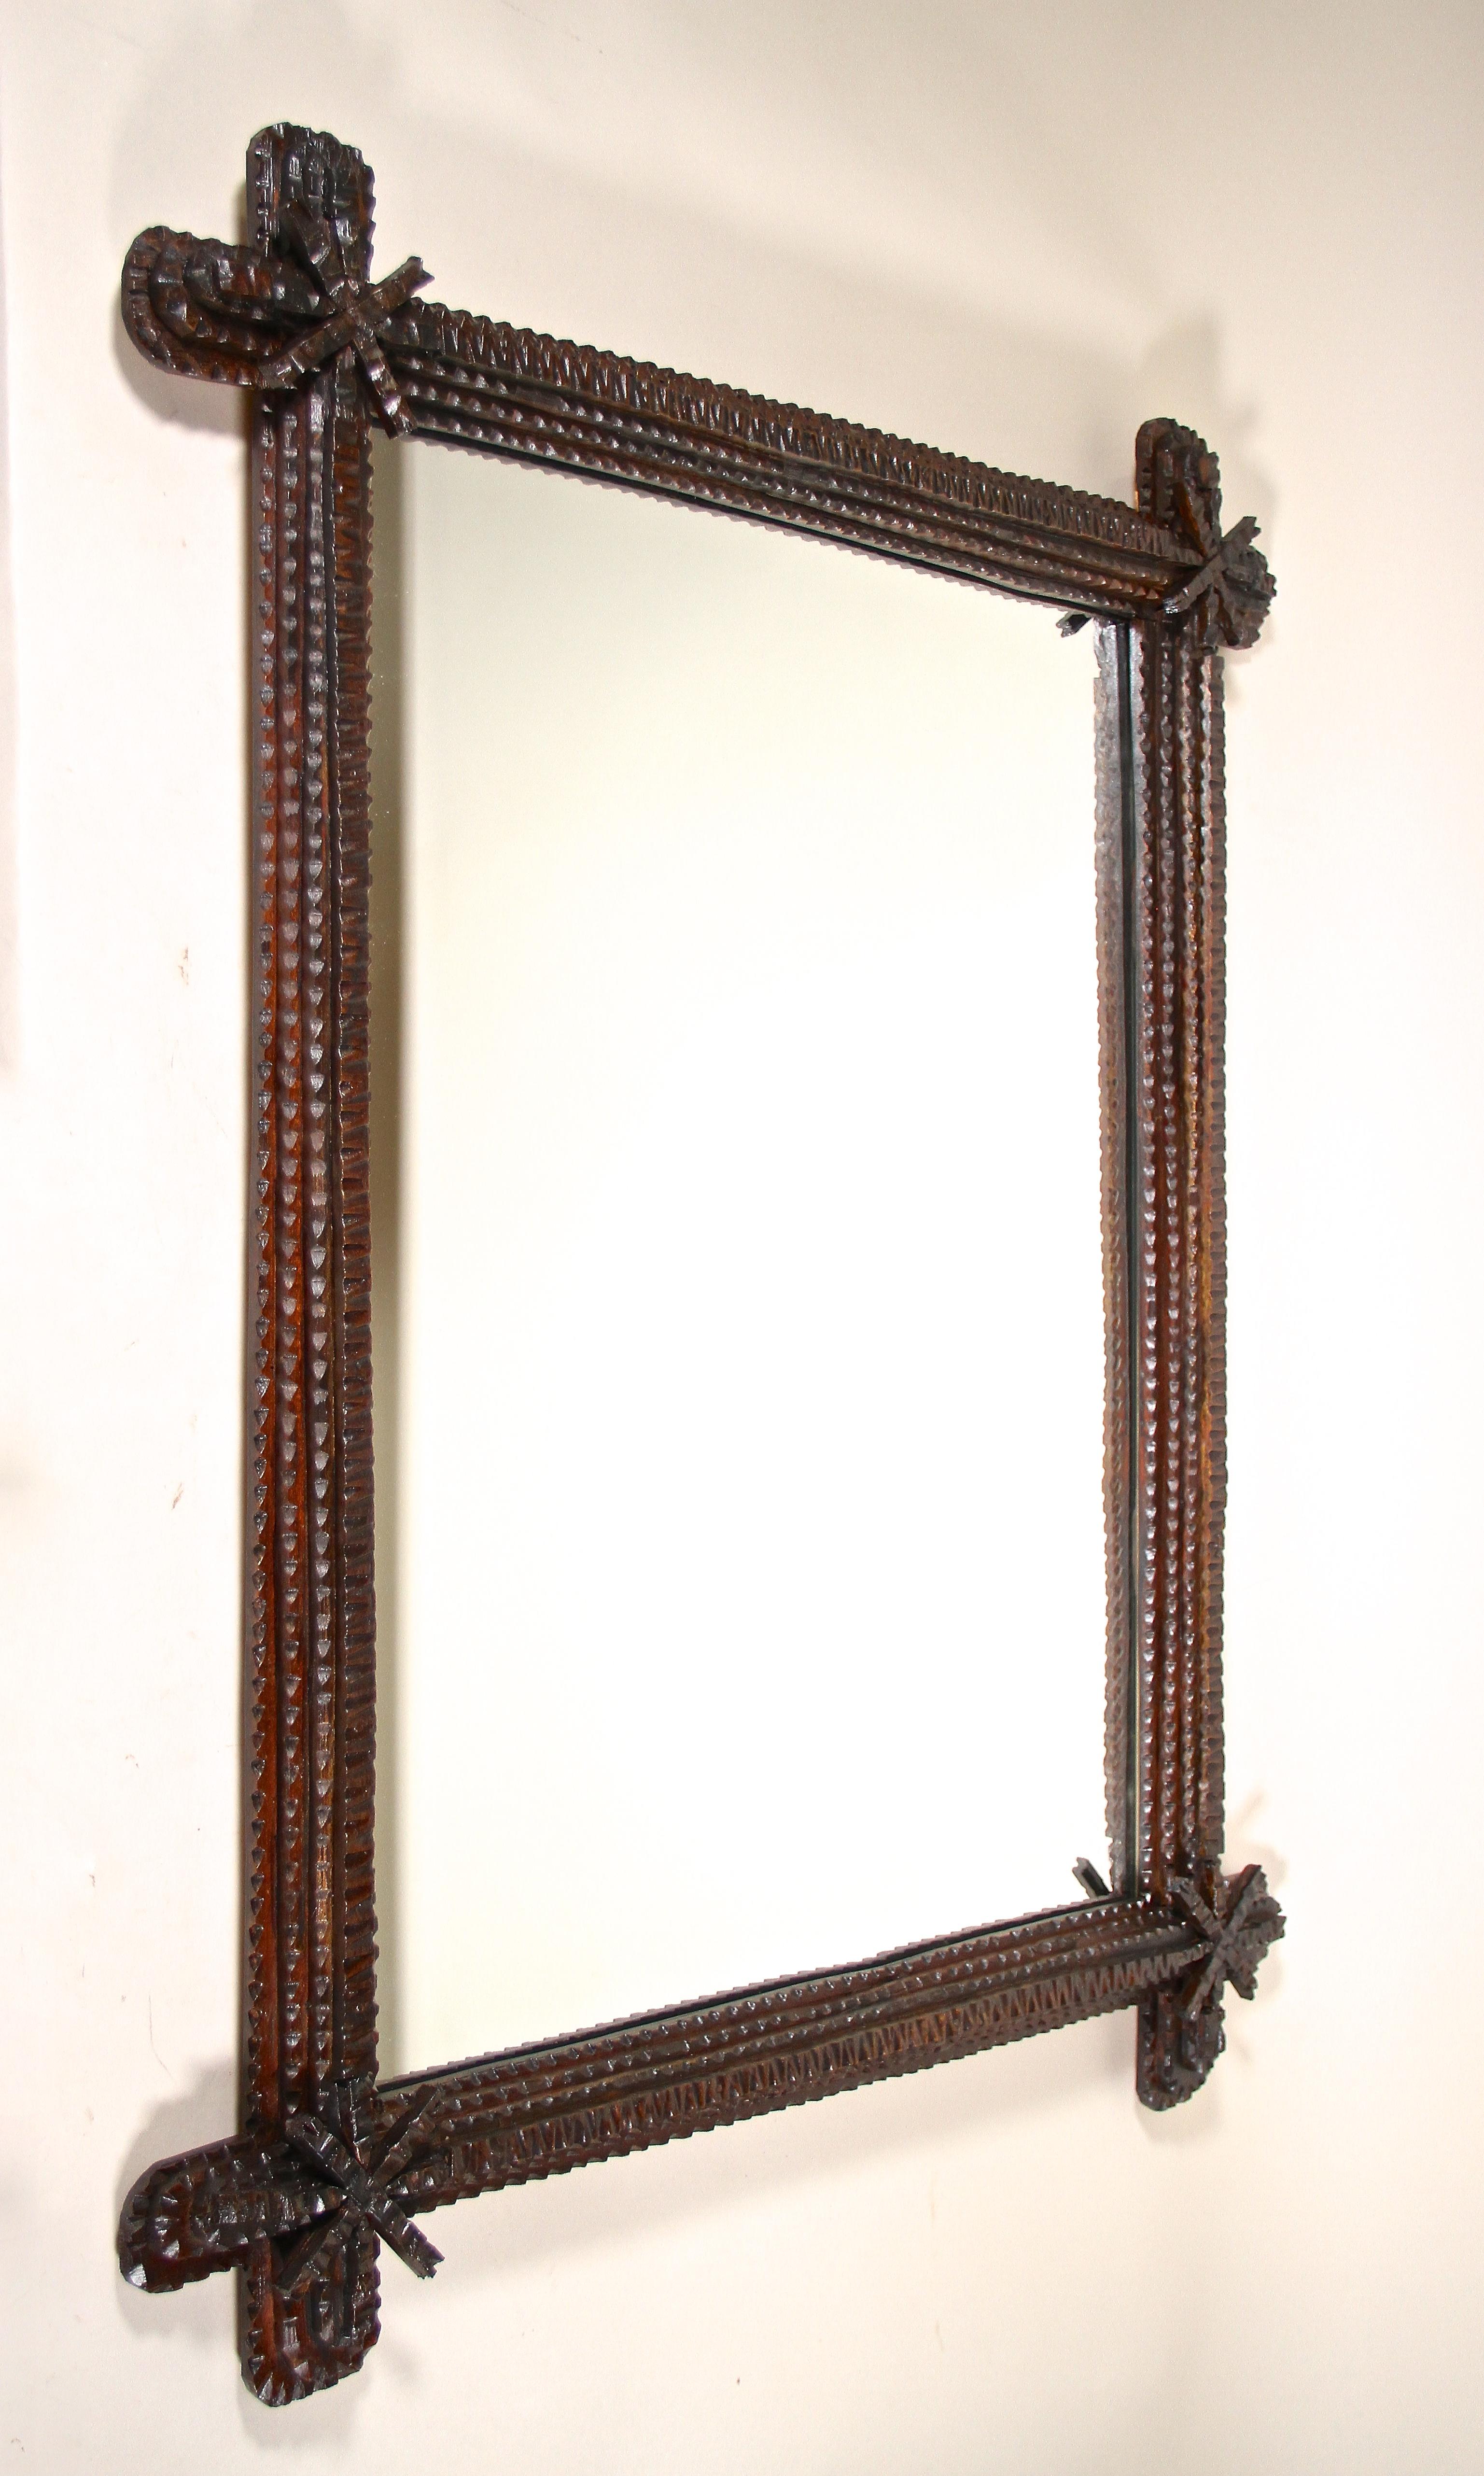 Magnificent old Rustic Tramp Art mirror from the late 19th century in Austria. Hand carved around 1870 out of basswood in a very artful way, this unique rustic wall mirror impresses with its beautiful chip carved design. The protruding, rounded